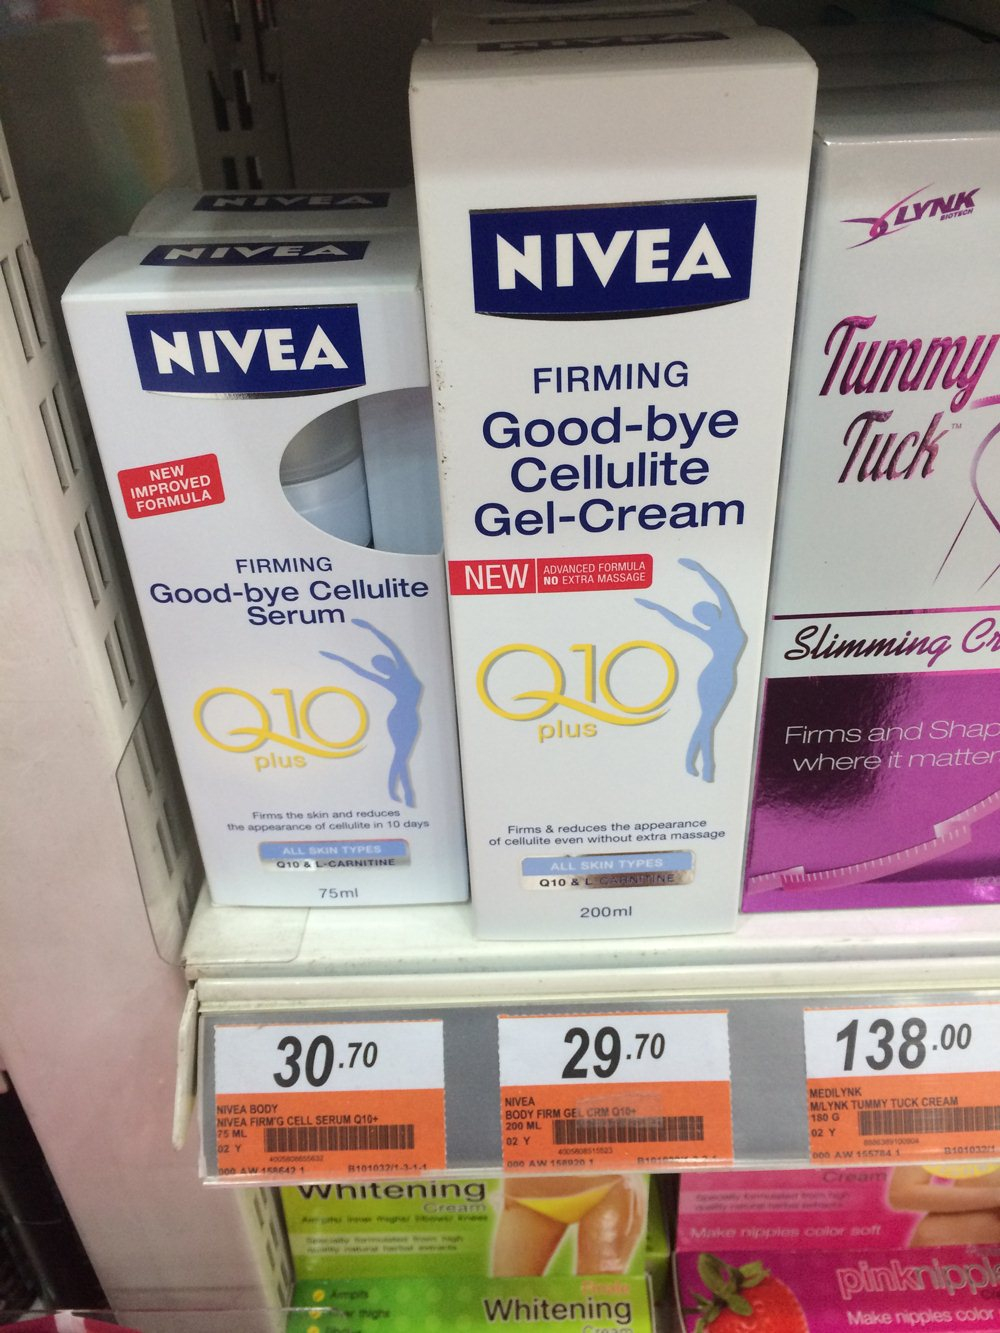 Nivea Q10 Firming Lotion Coupon / Juicy Couture Printable Coupon 2018 - Free Printable Nivea Coupons